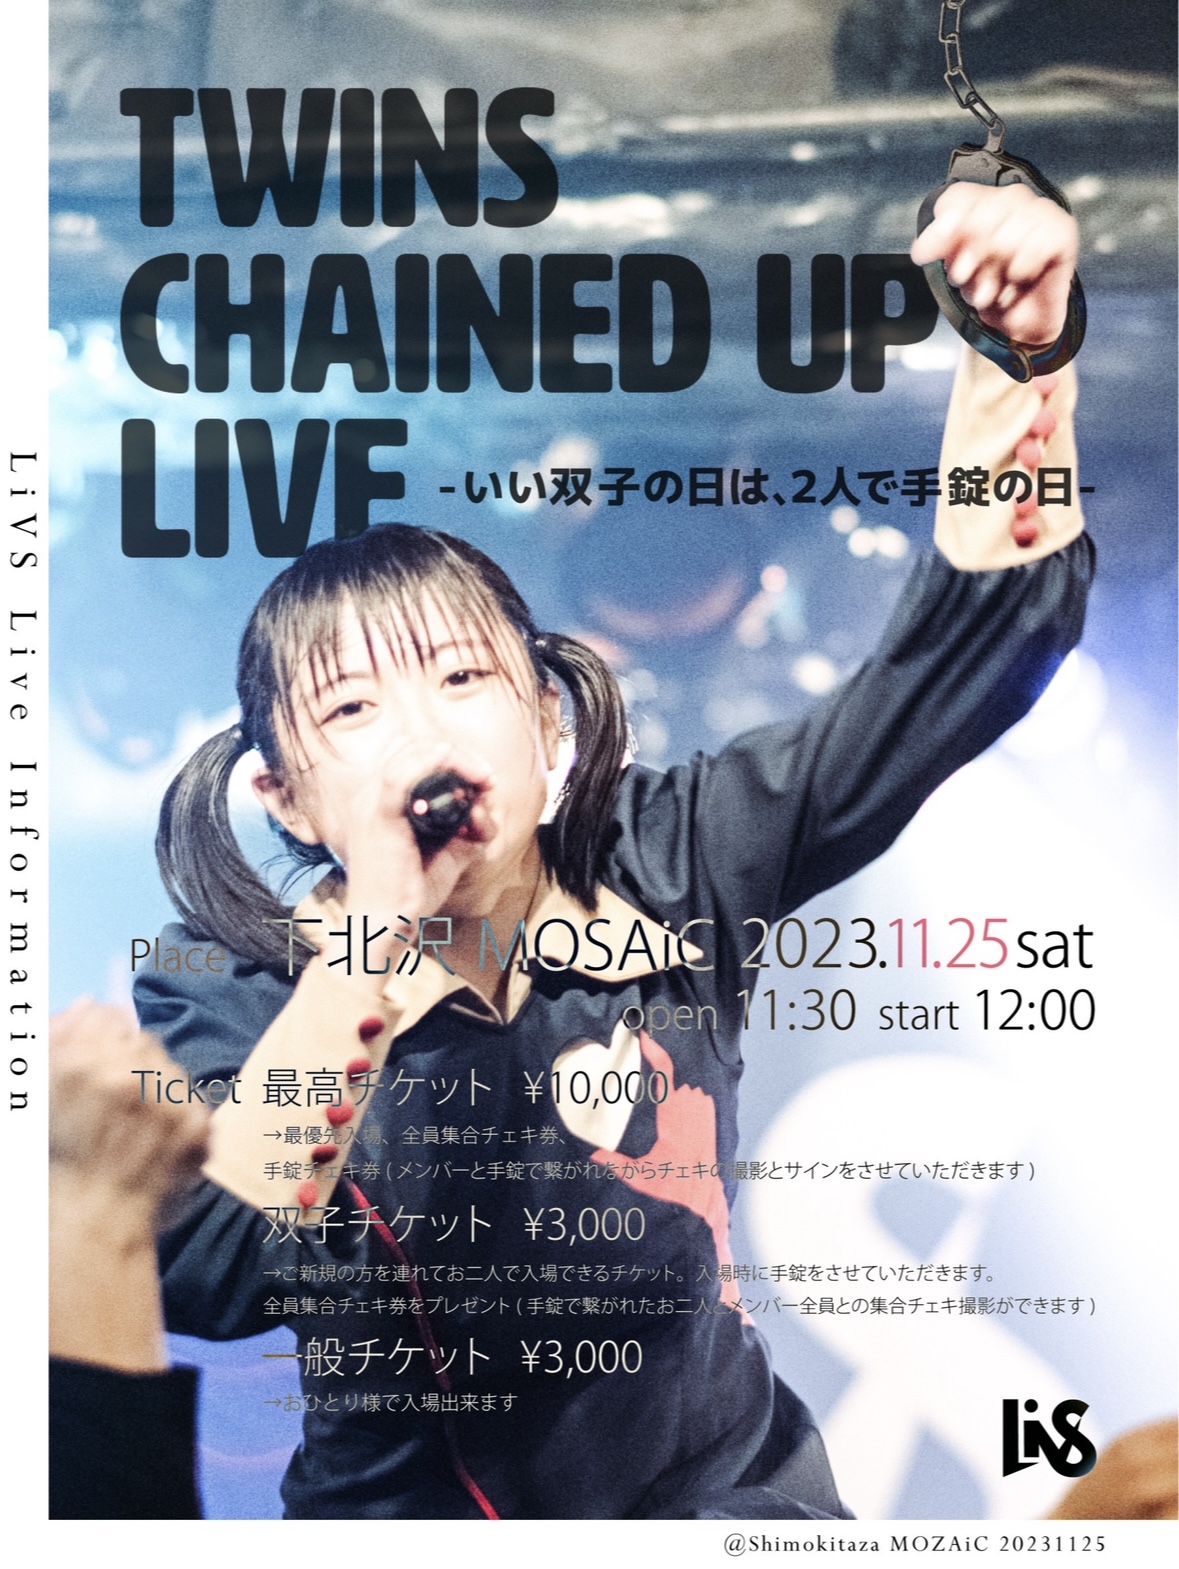 TWINS CHAINED UP LIVE〜いい双子の日は2人で手錠の日〜のチケット情報